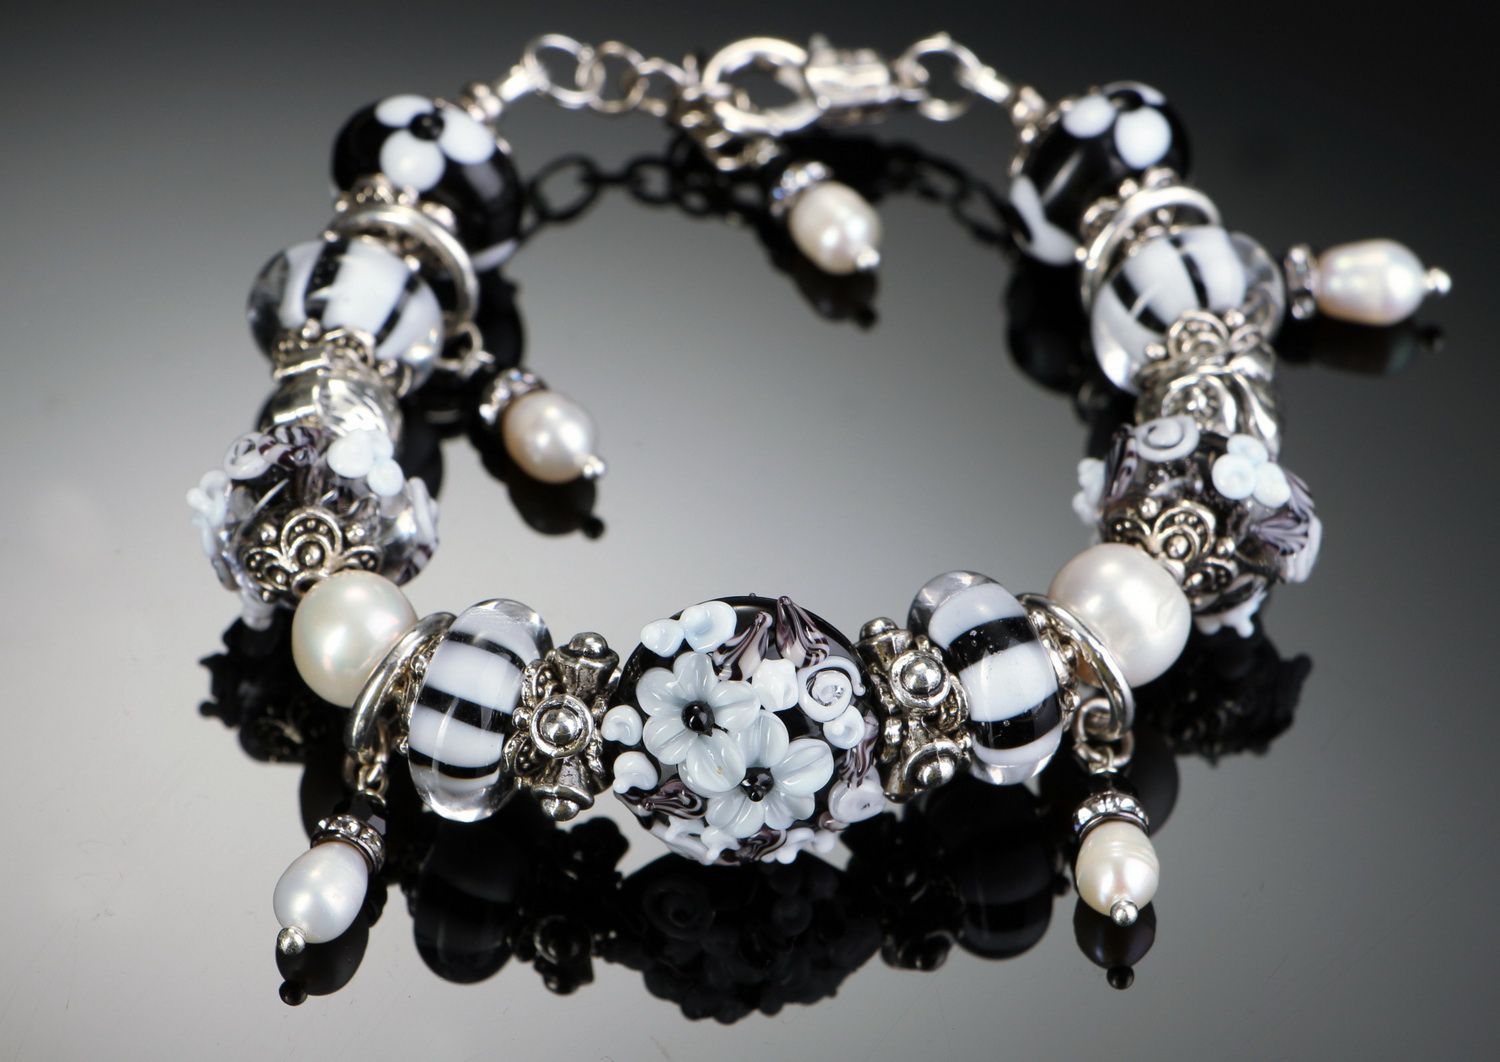 Wrist bracelet with river pearls and glass beads Garden of Eden photo 2